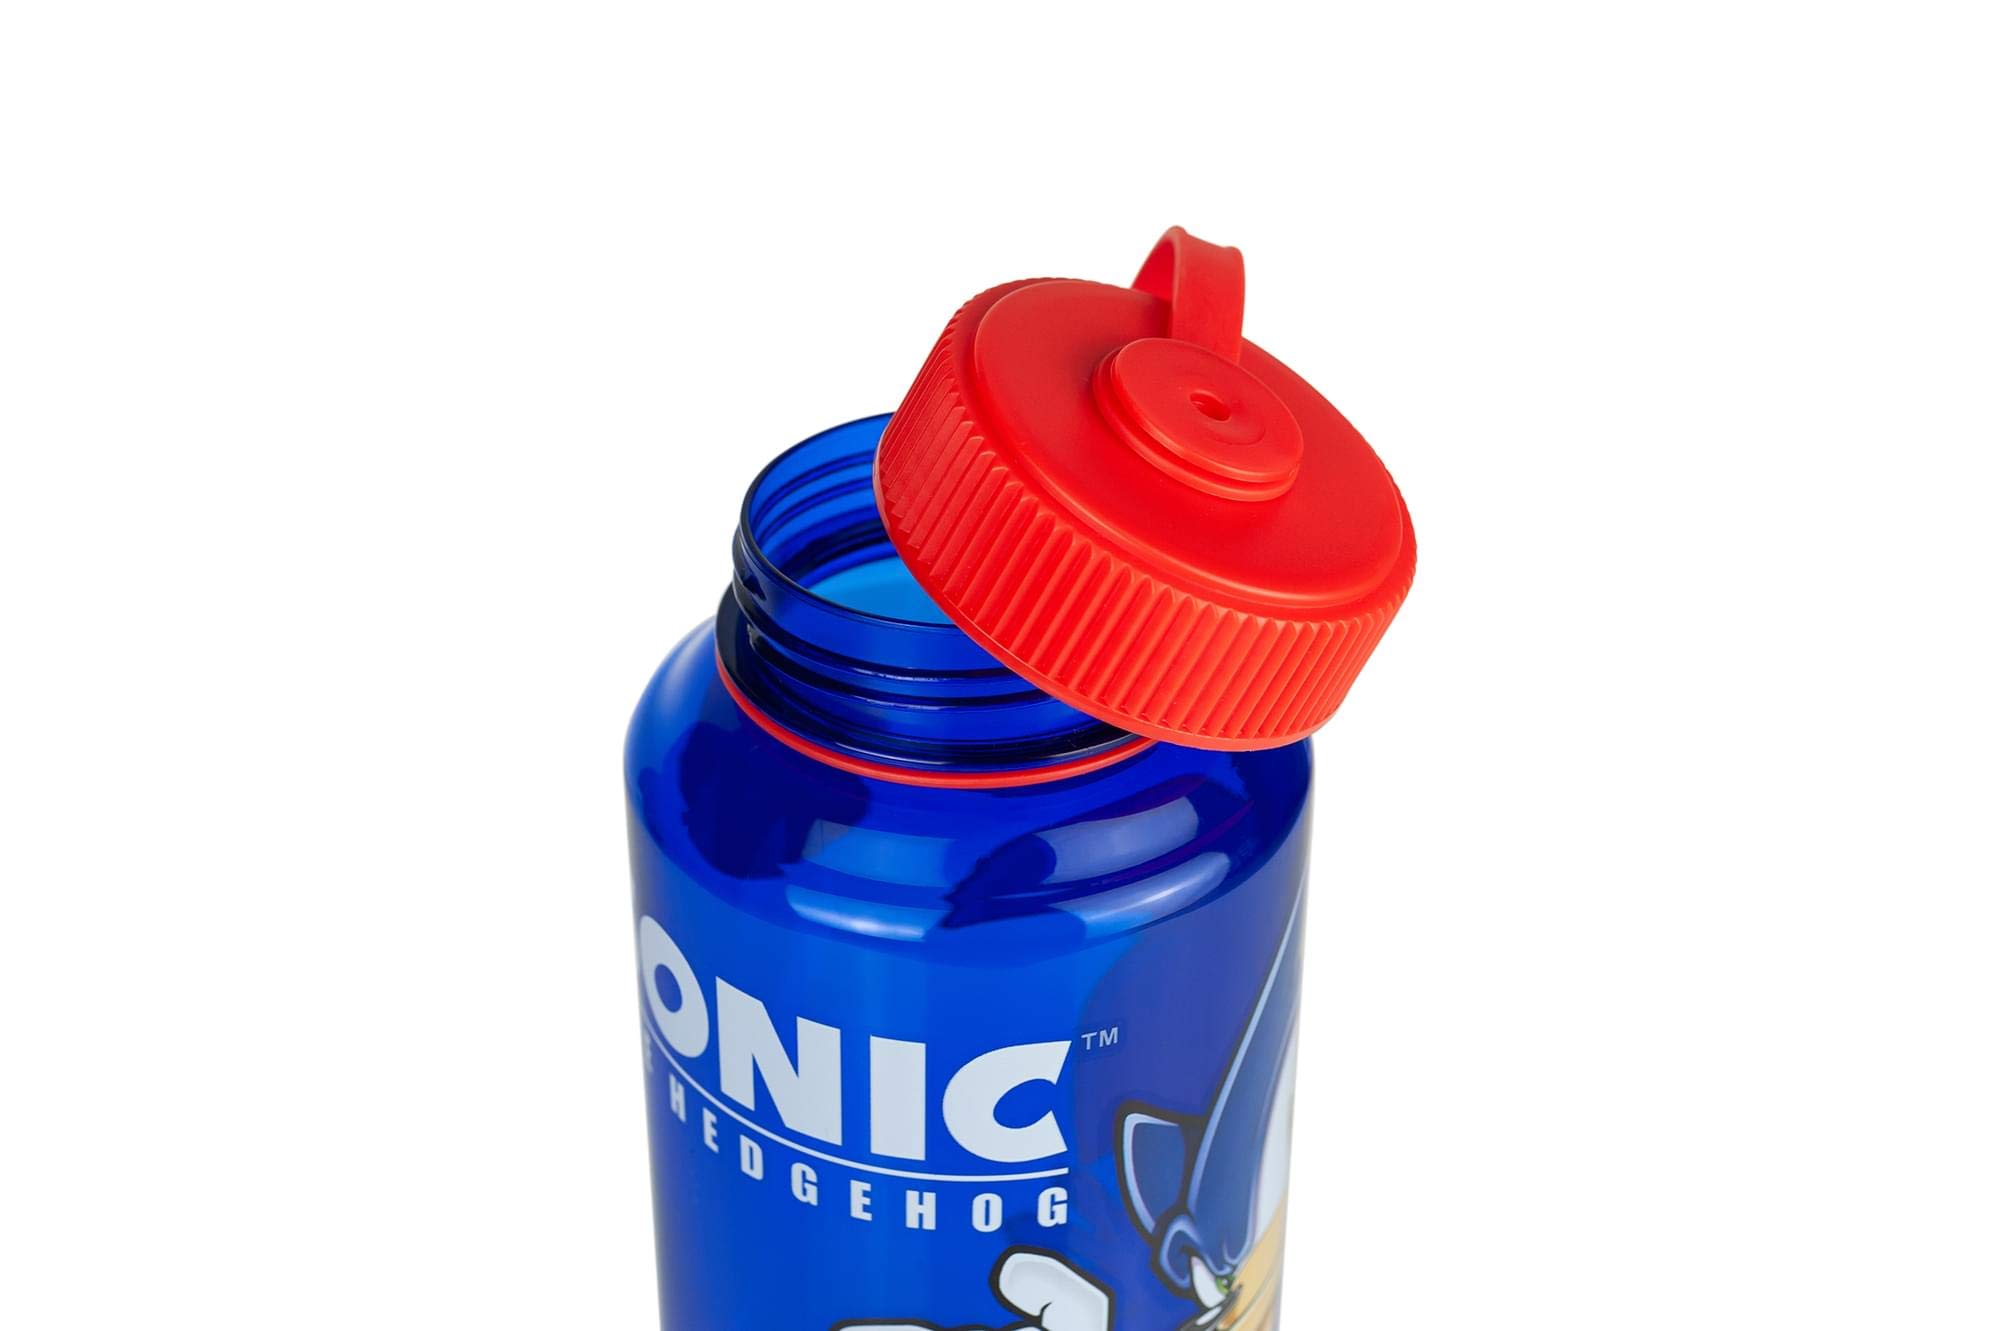 Just Funky Sonic The Hedgehog Plastic Water Bottle - Reusable 32oz Travel Tumbler Drink Holder With Leak/Spill-Proof Lid - Great For School, Sports, Backpack, Lunchbox, Birthday Party Favors - From